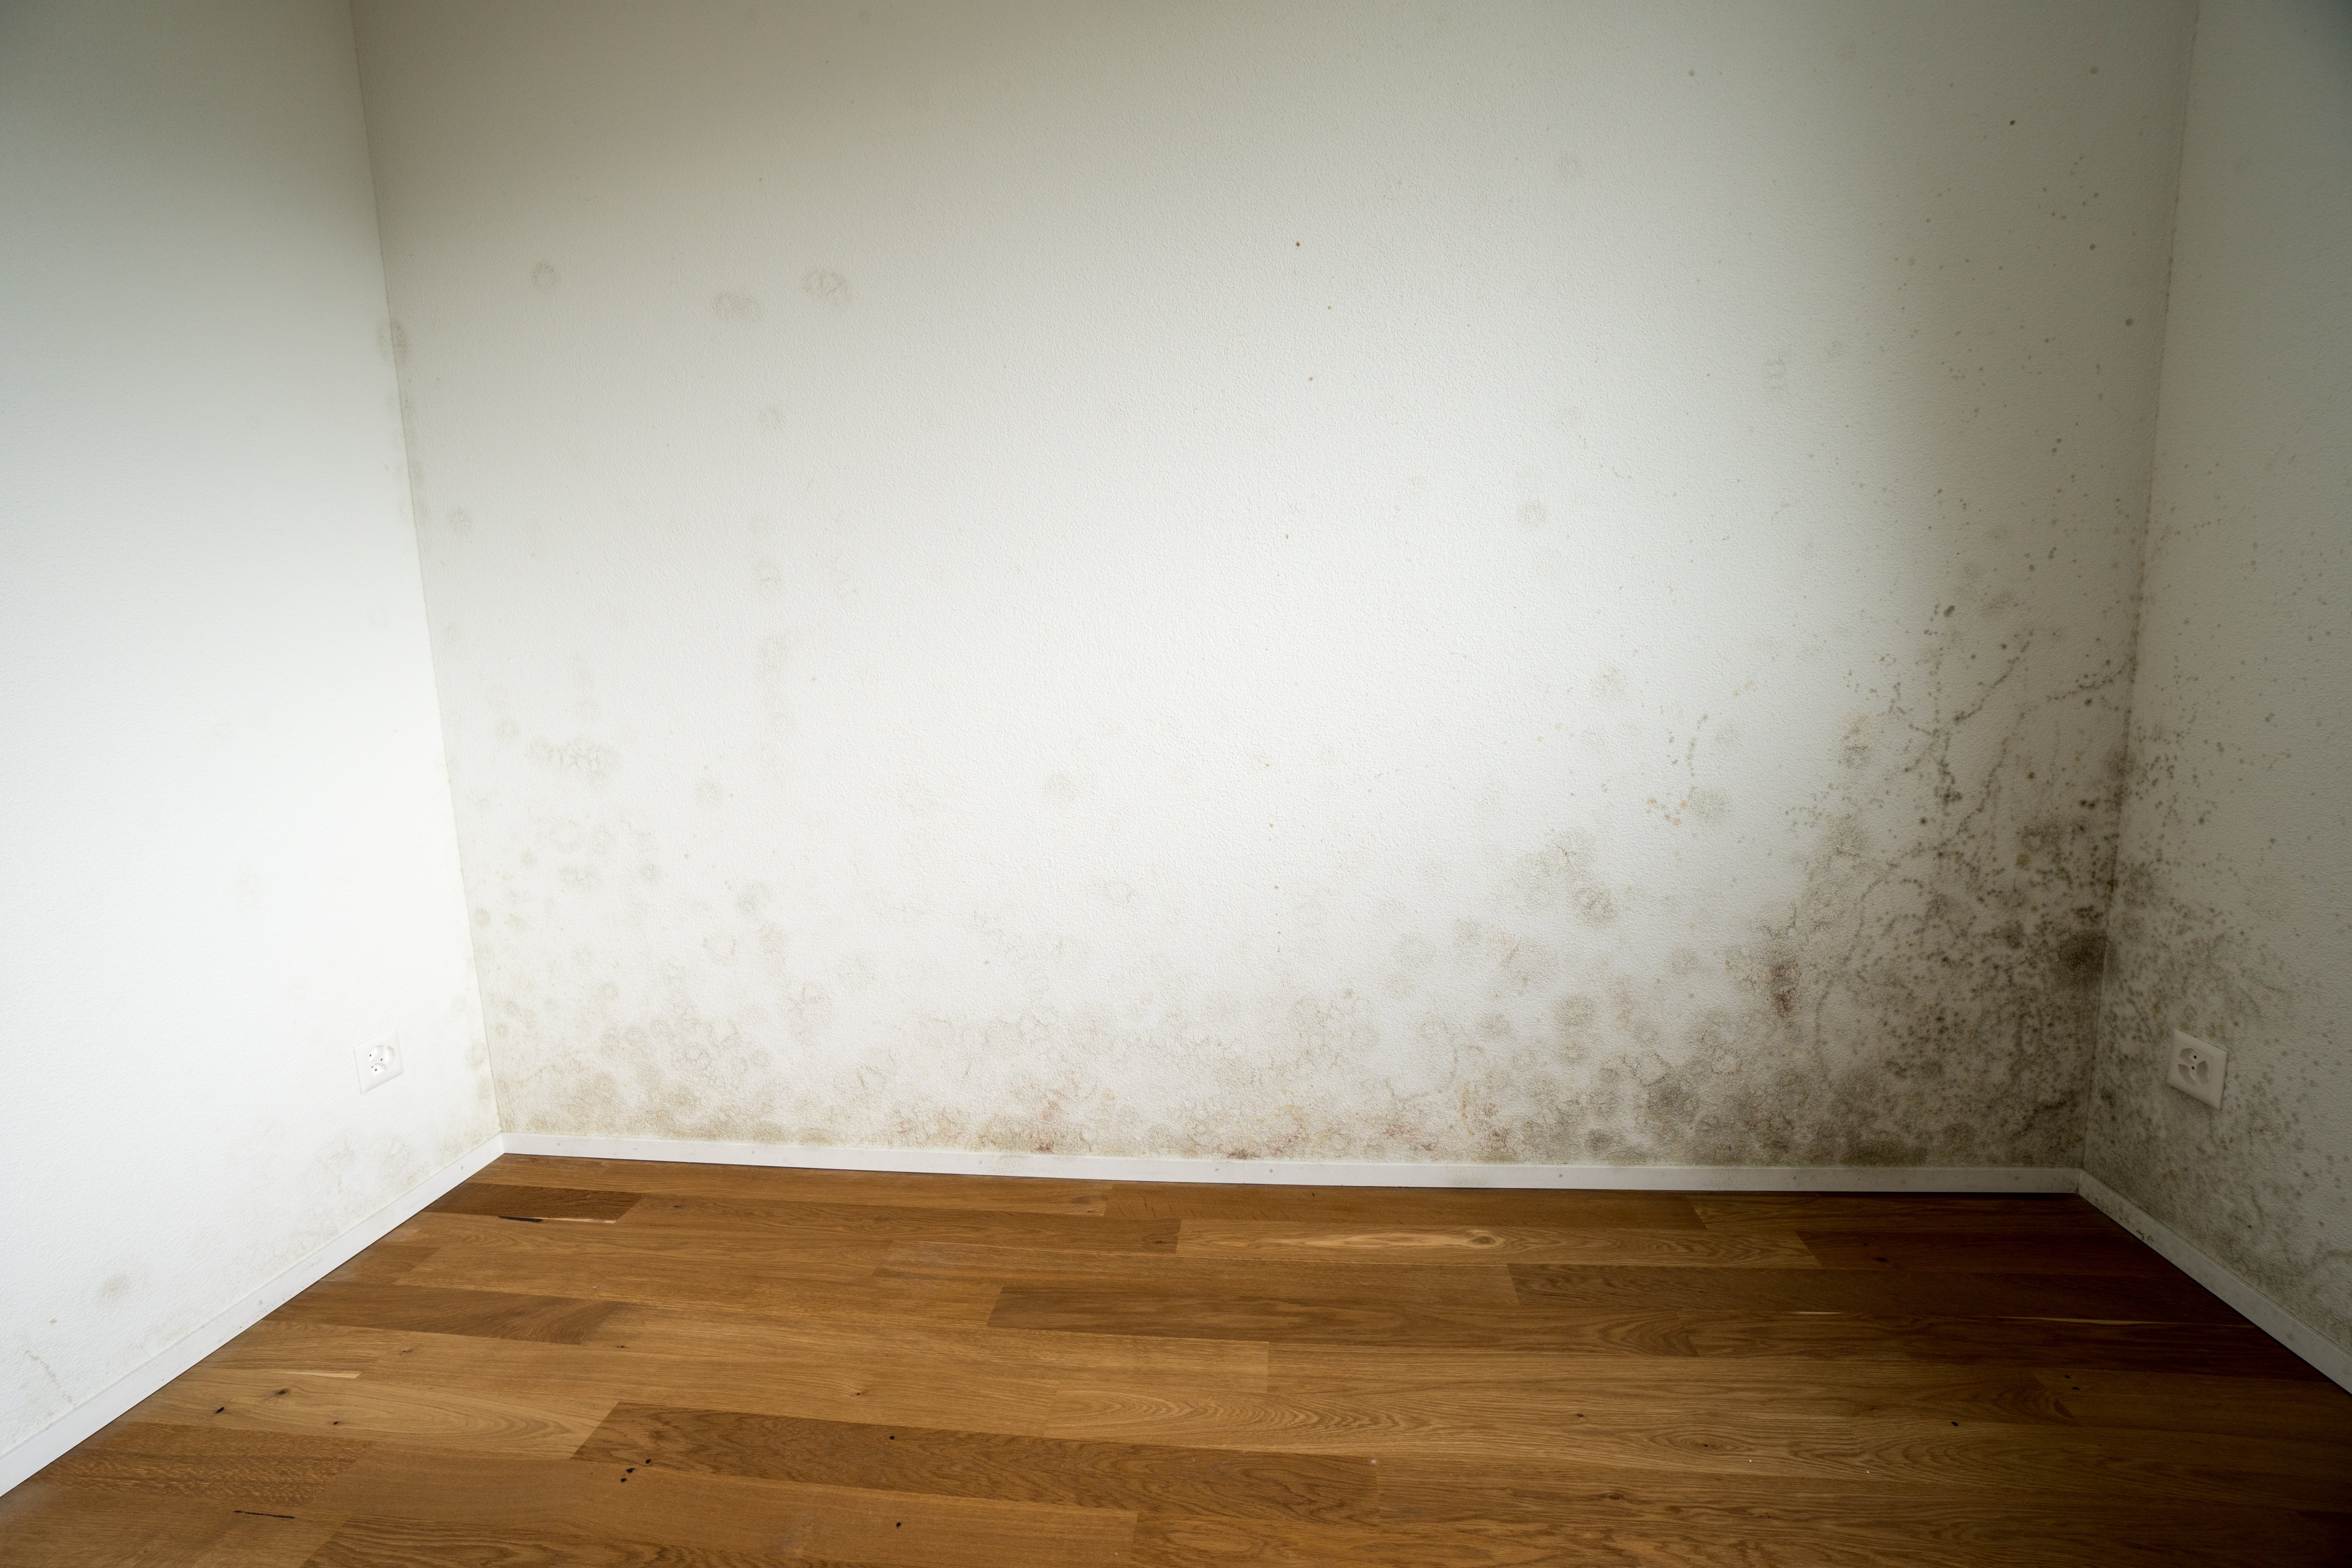 Painting over mold or mildew on a wall in Pittsburgh